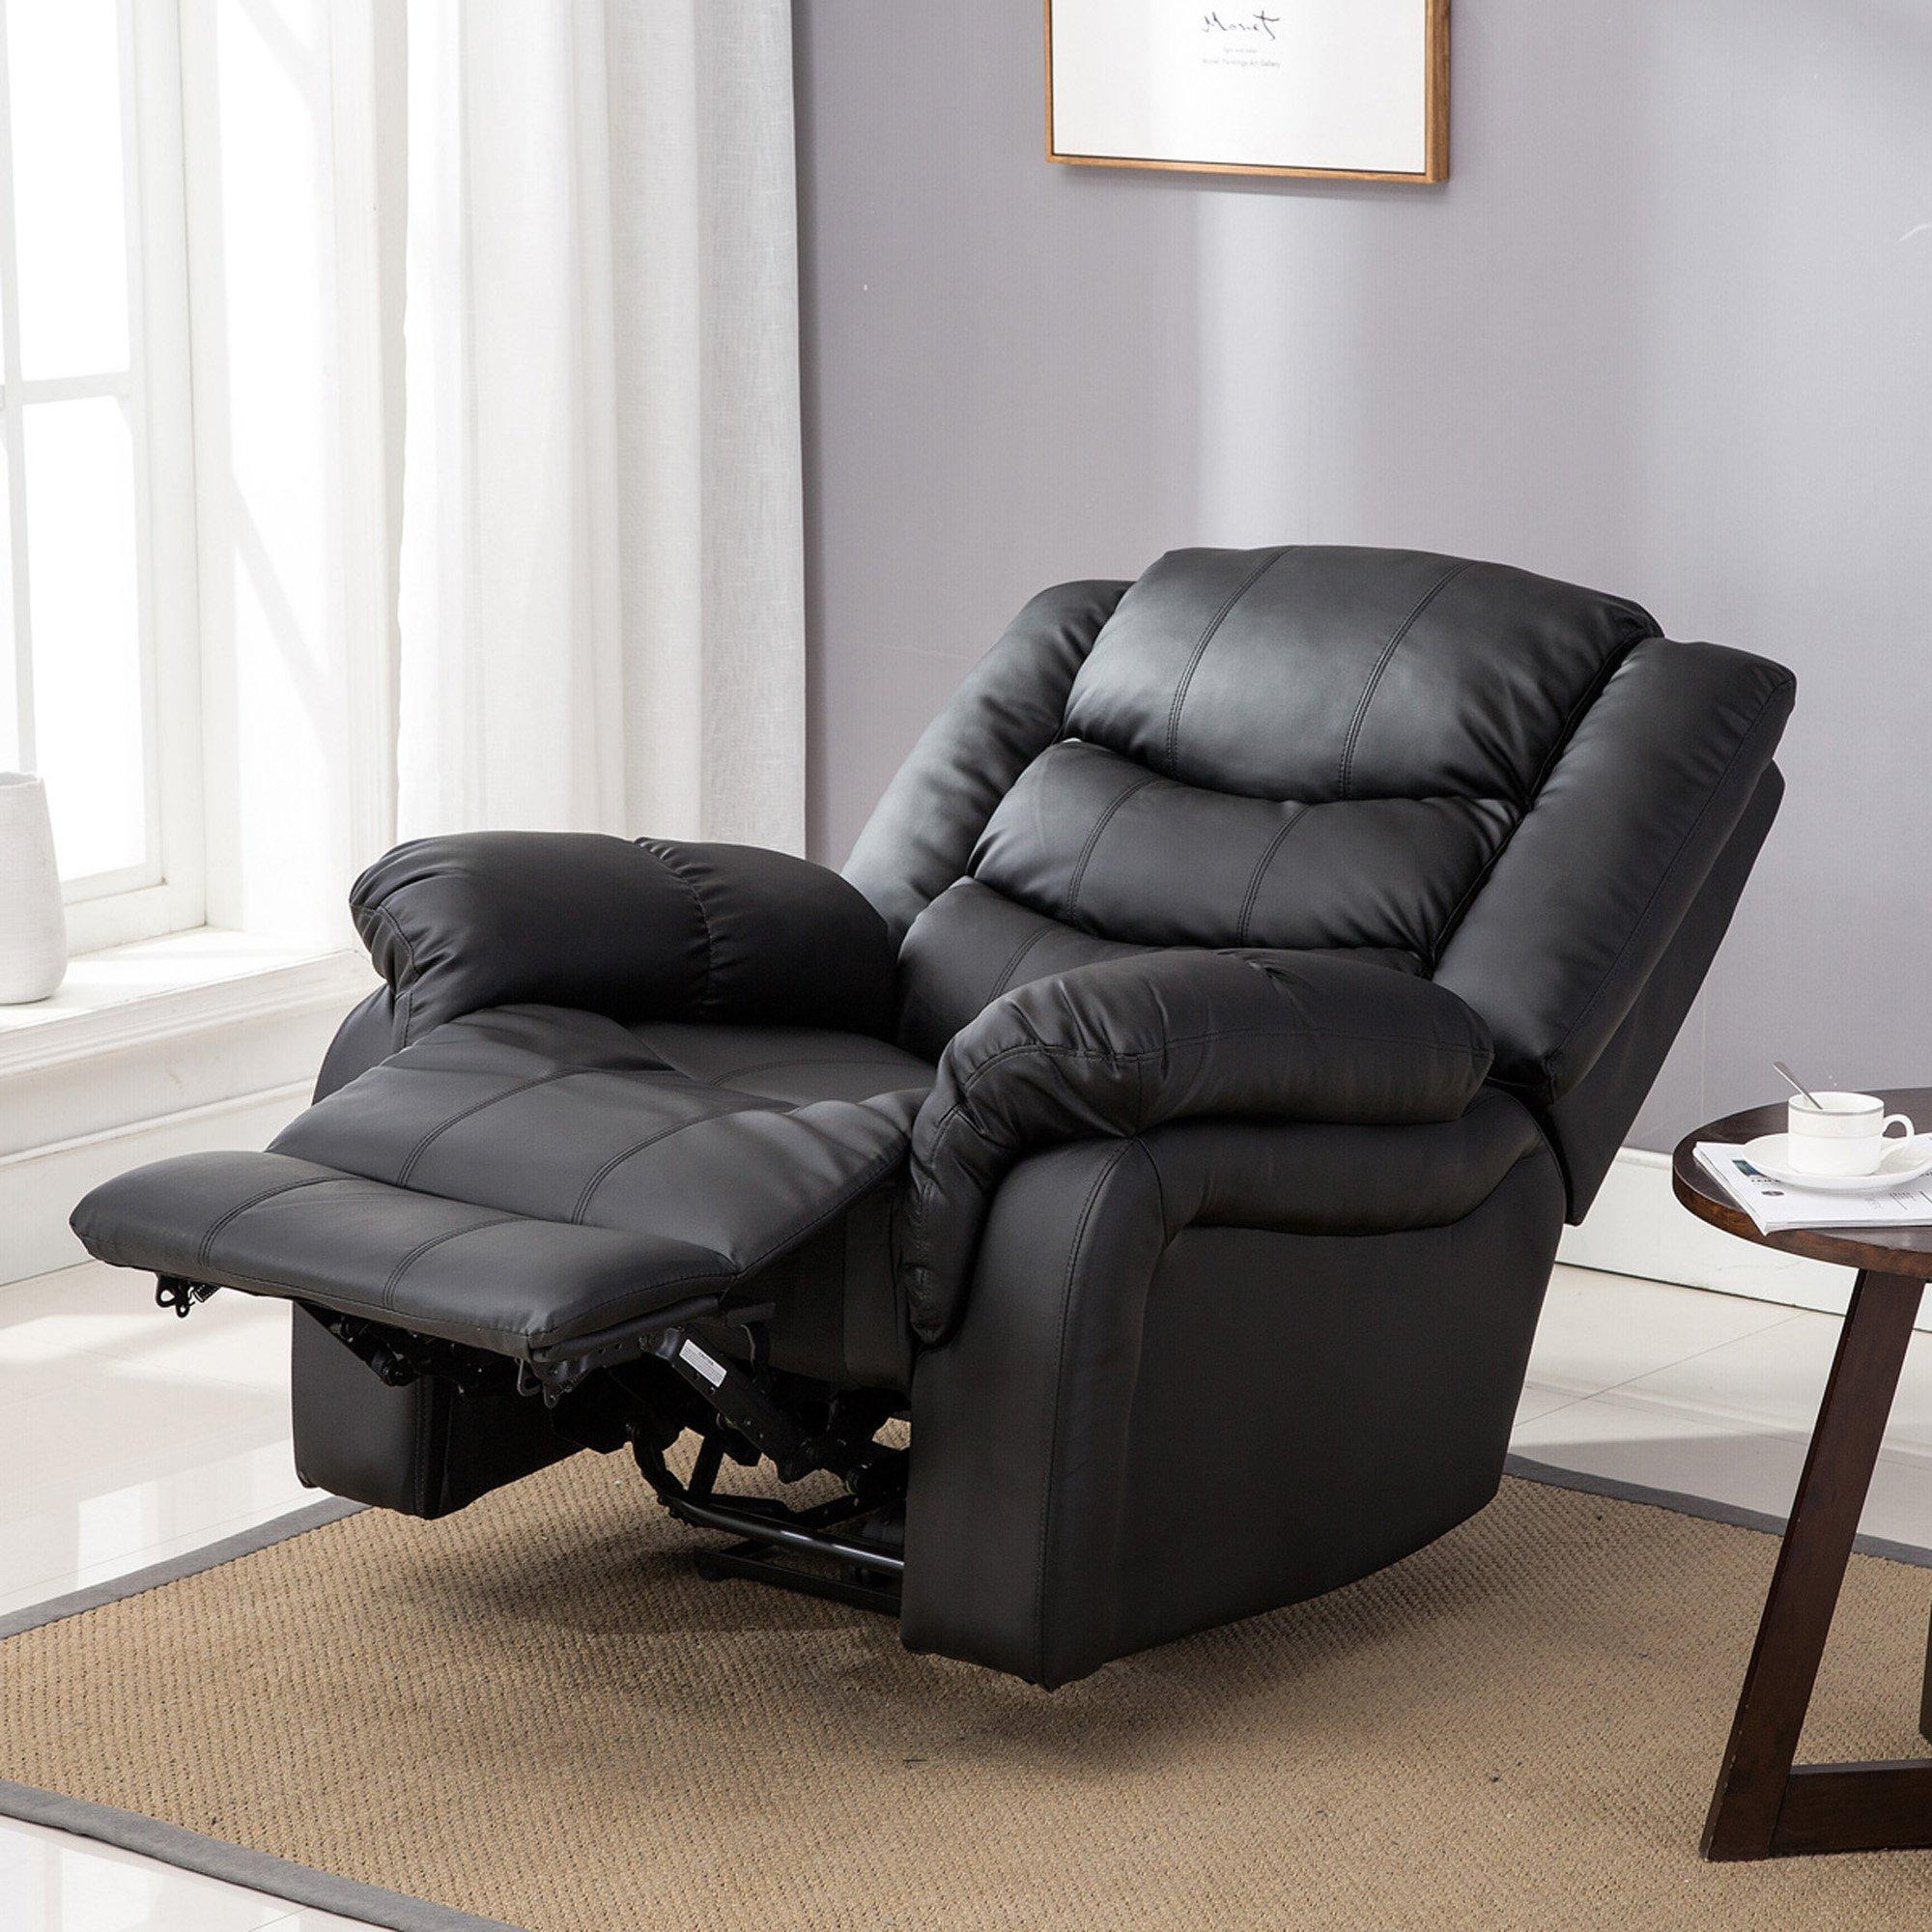 Seattle Electric Automatic Recliner Home Lounge Bonded Leather Chair - image 1